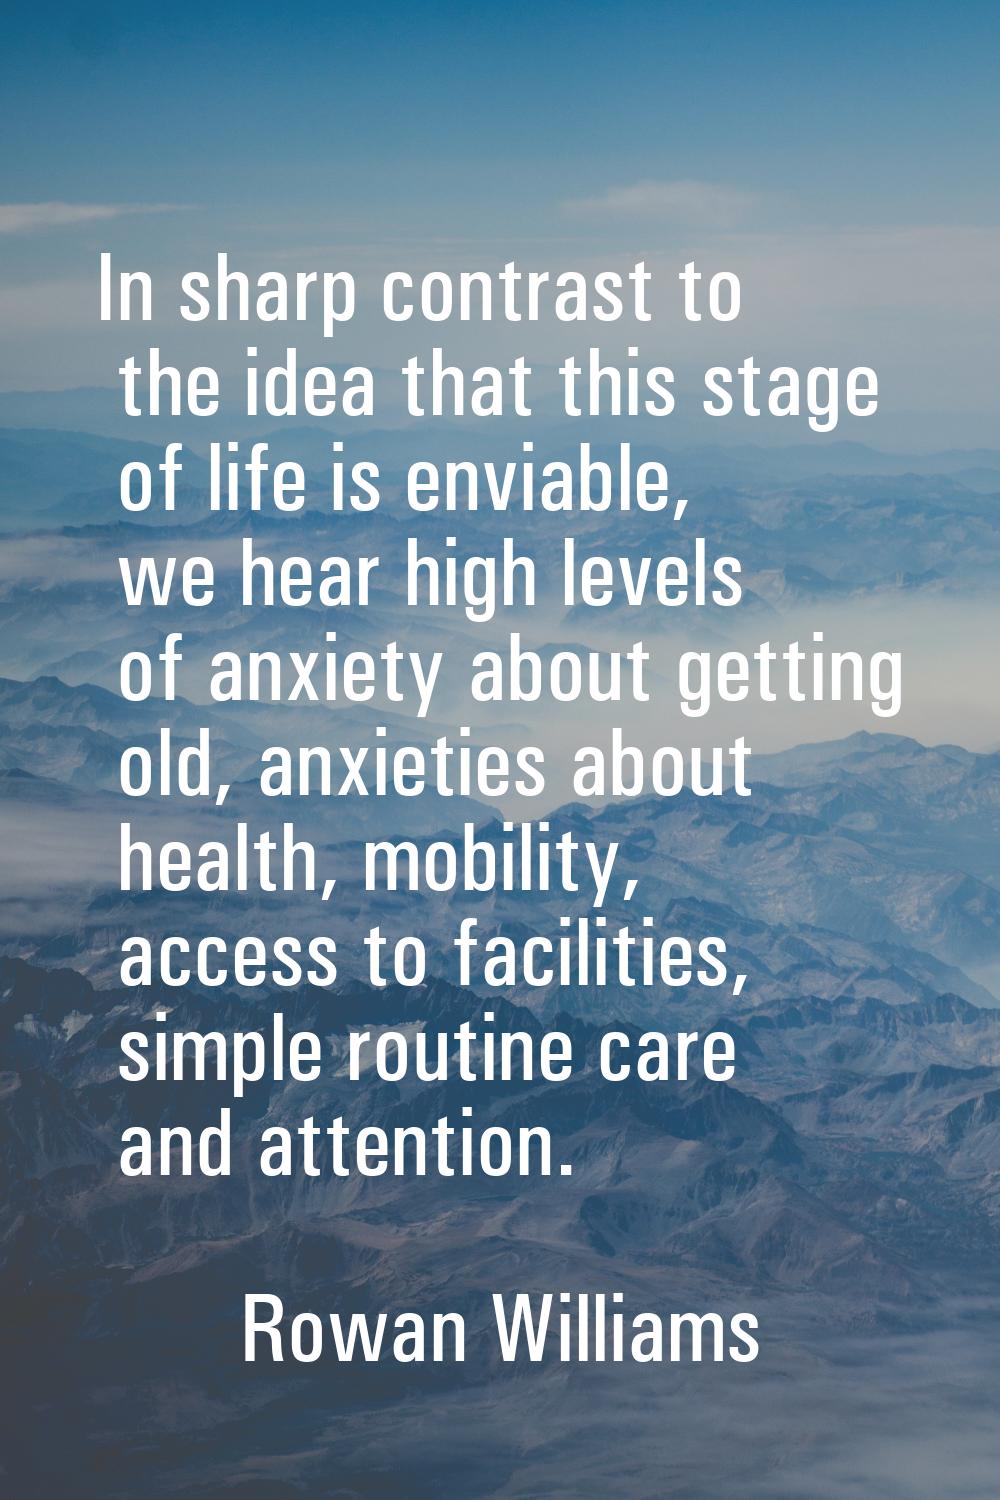 In sharp contrast to the idea that this stage of life is enviable, we hear high levels of anxiety a